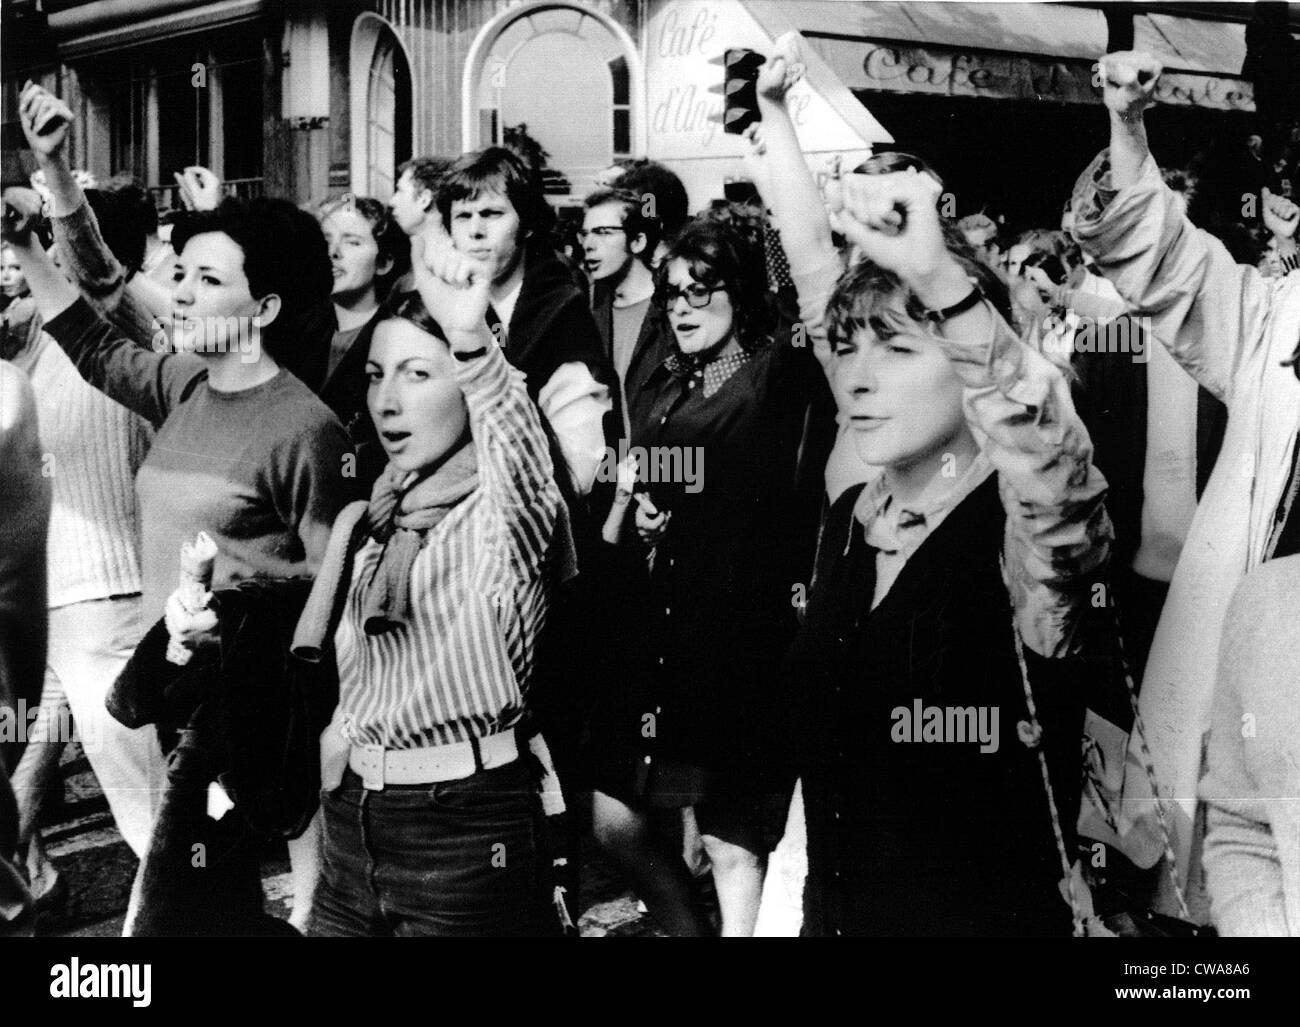 MARCHES-Men & women throw their arms in the air during a march through the streets of downtown Paris for popular government in Stock Photo